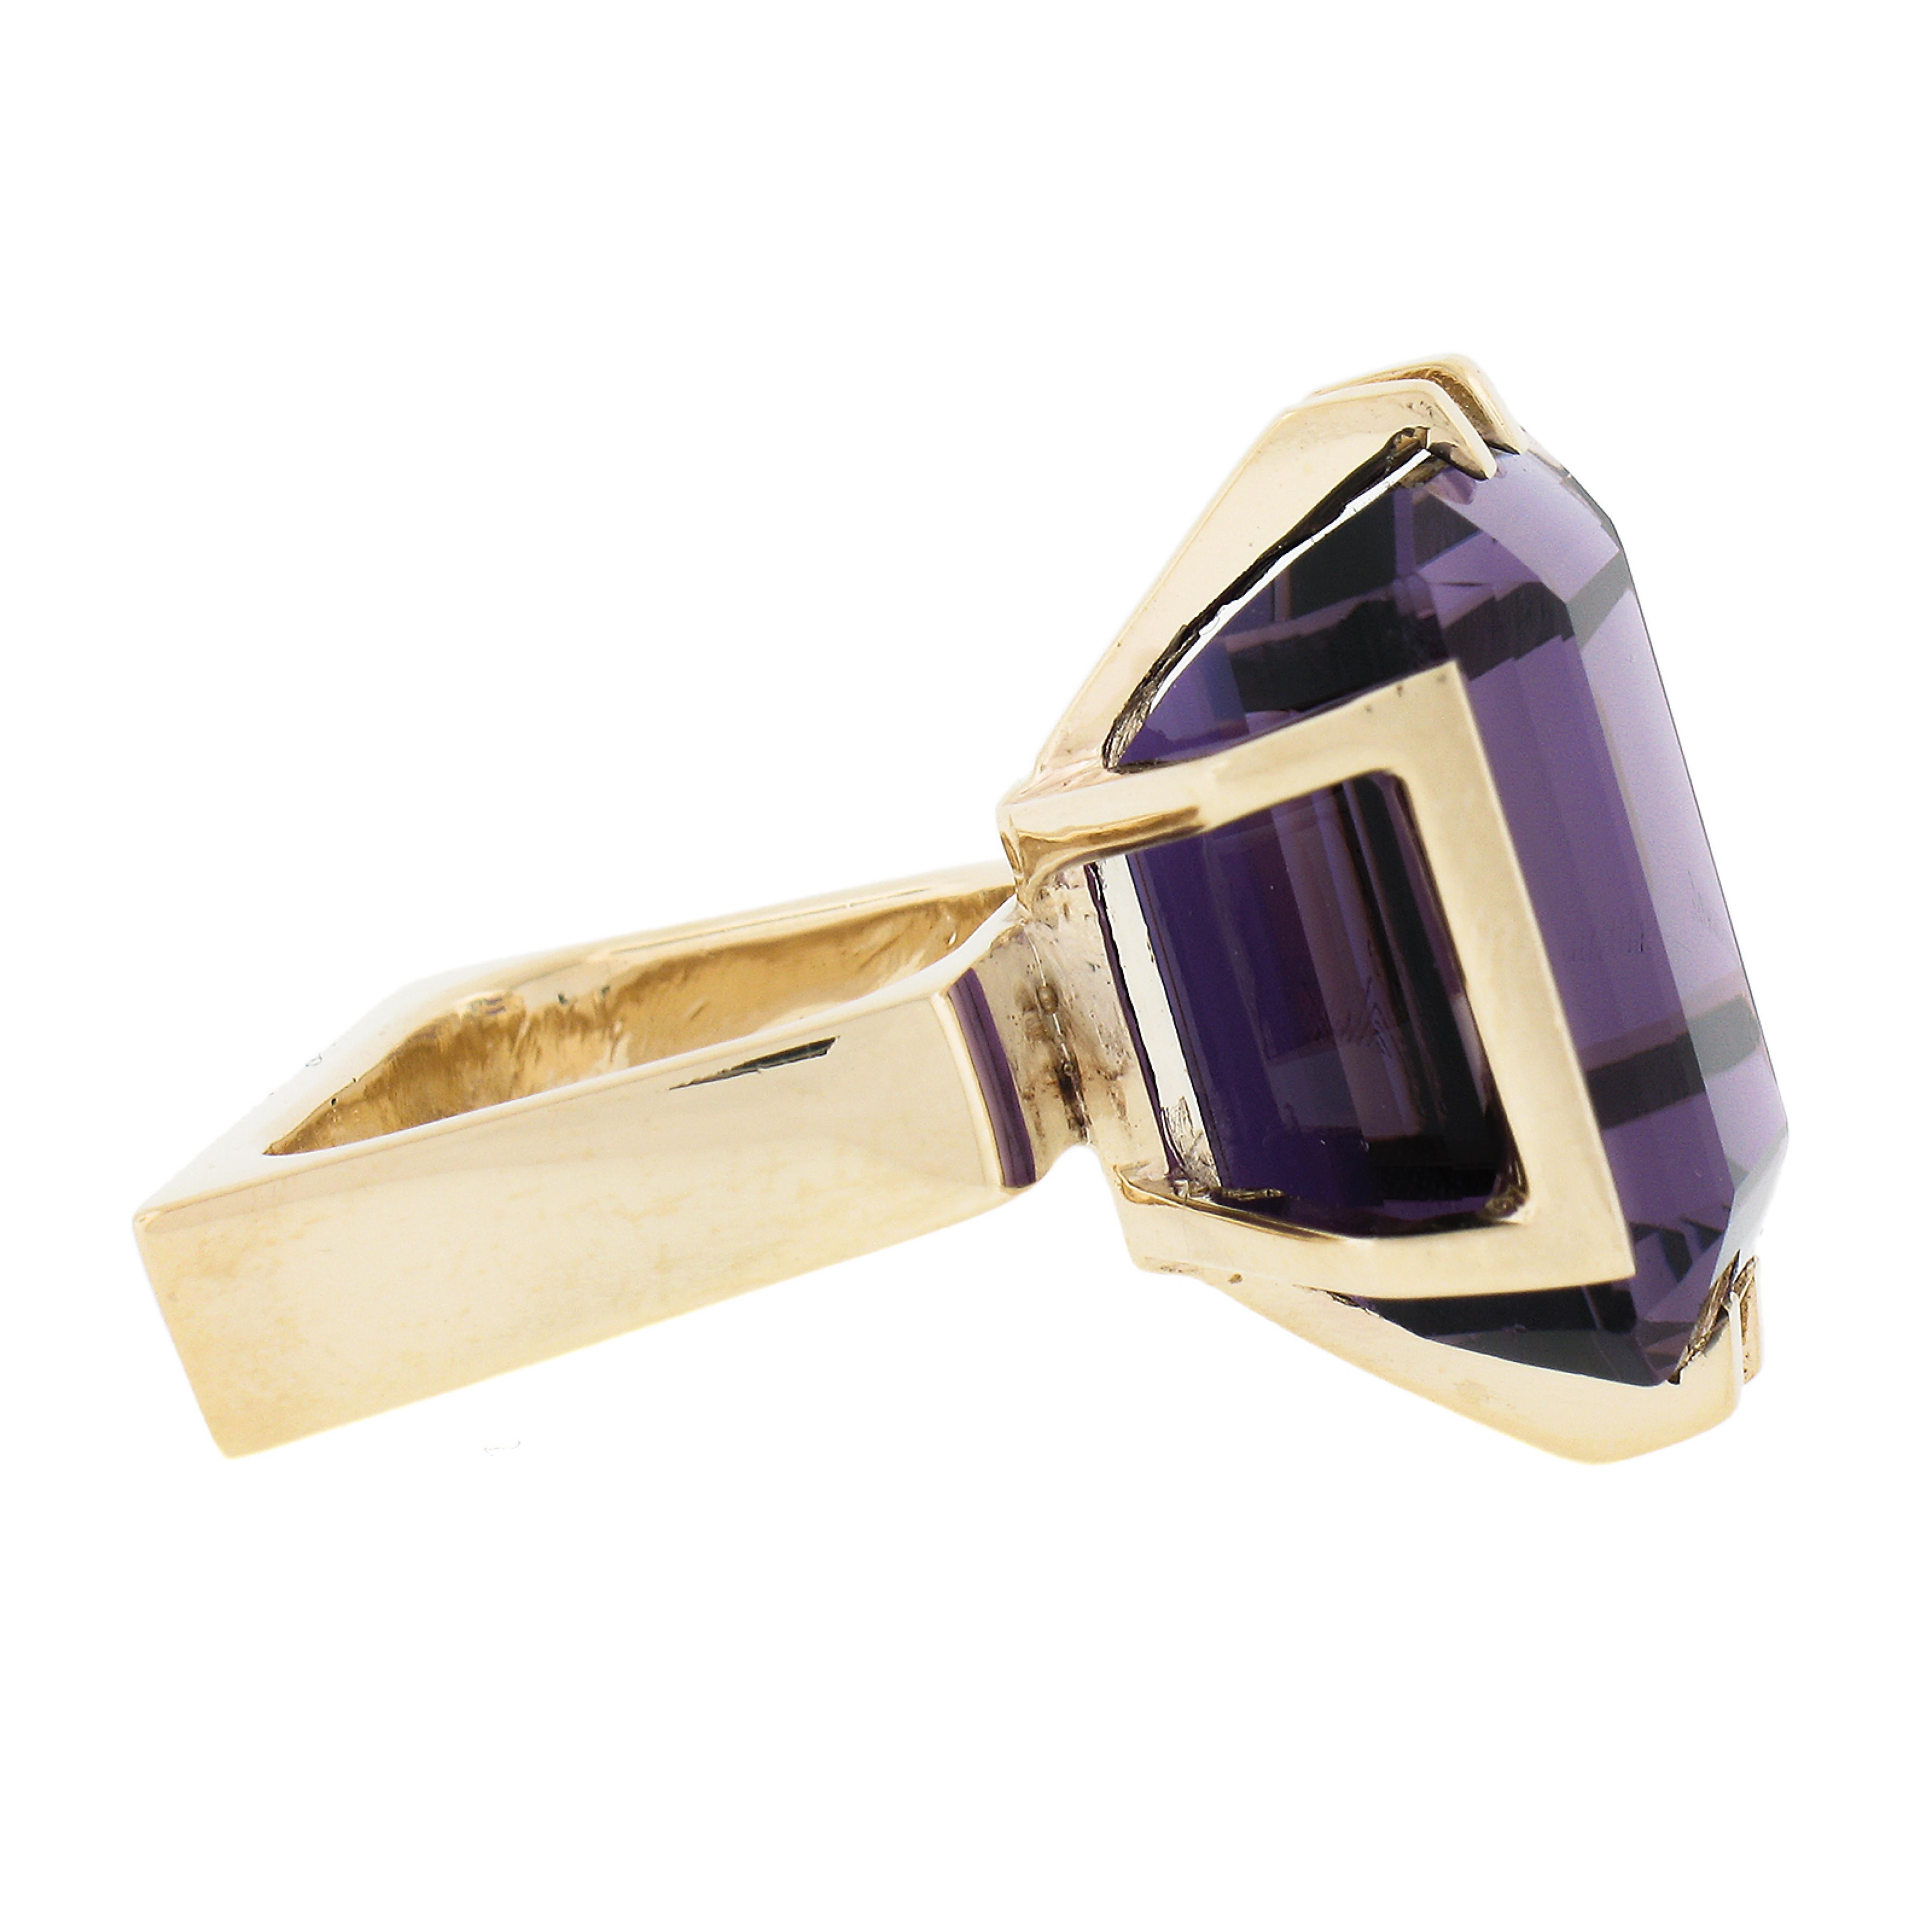 Vintage 14K Gold 20ct Large Emerald Cut Amethyst Solitaire Squared Cocktail Ring For Sale 1